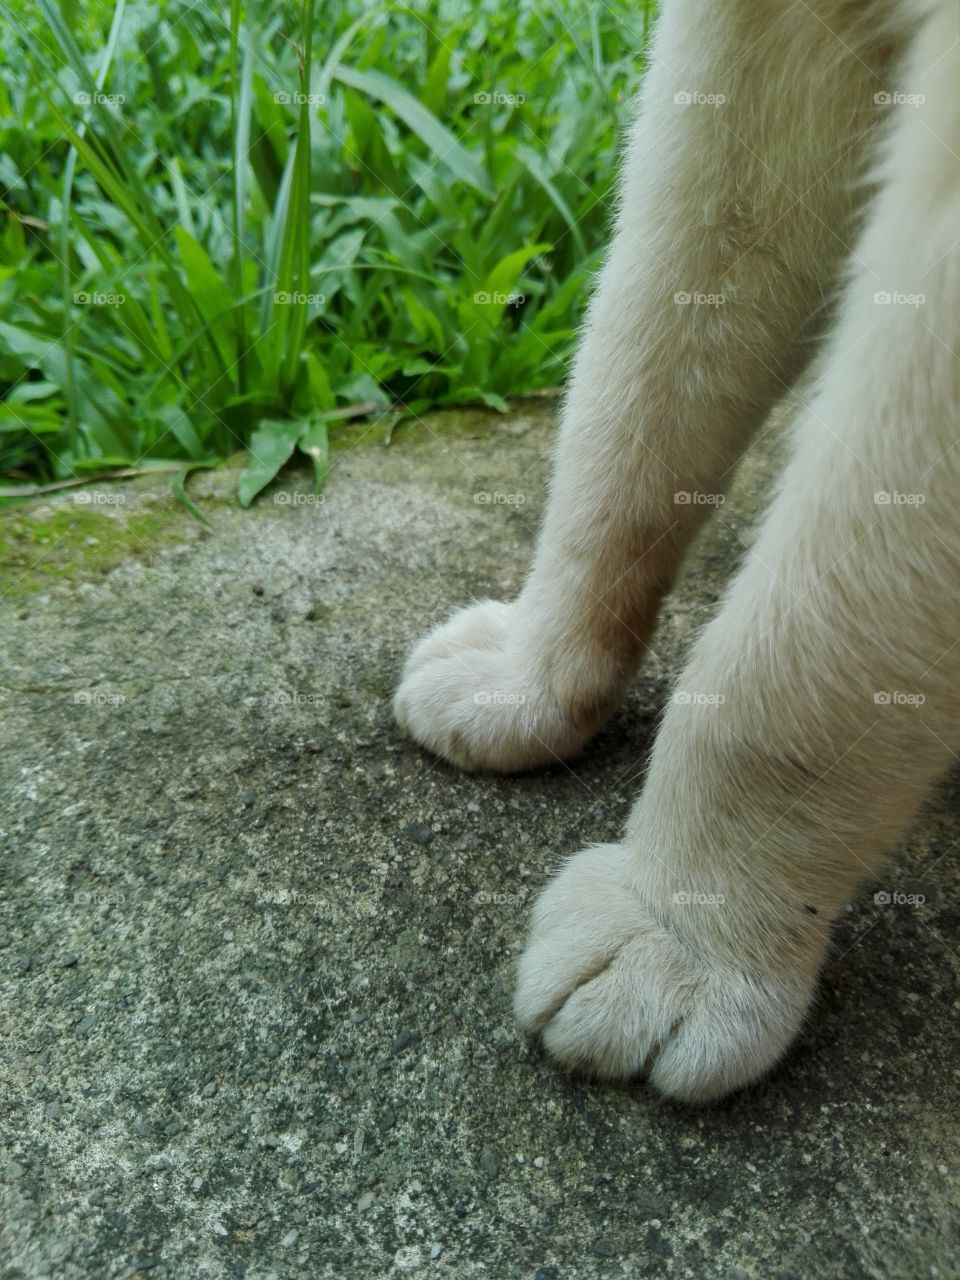 A cat's paw is one of the most beautiful thing to look at.